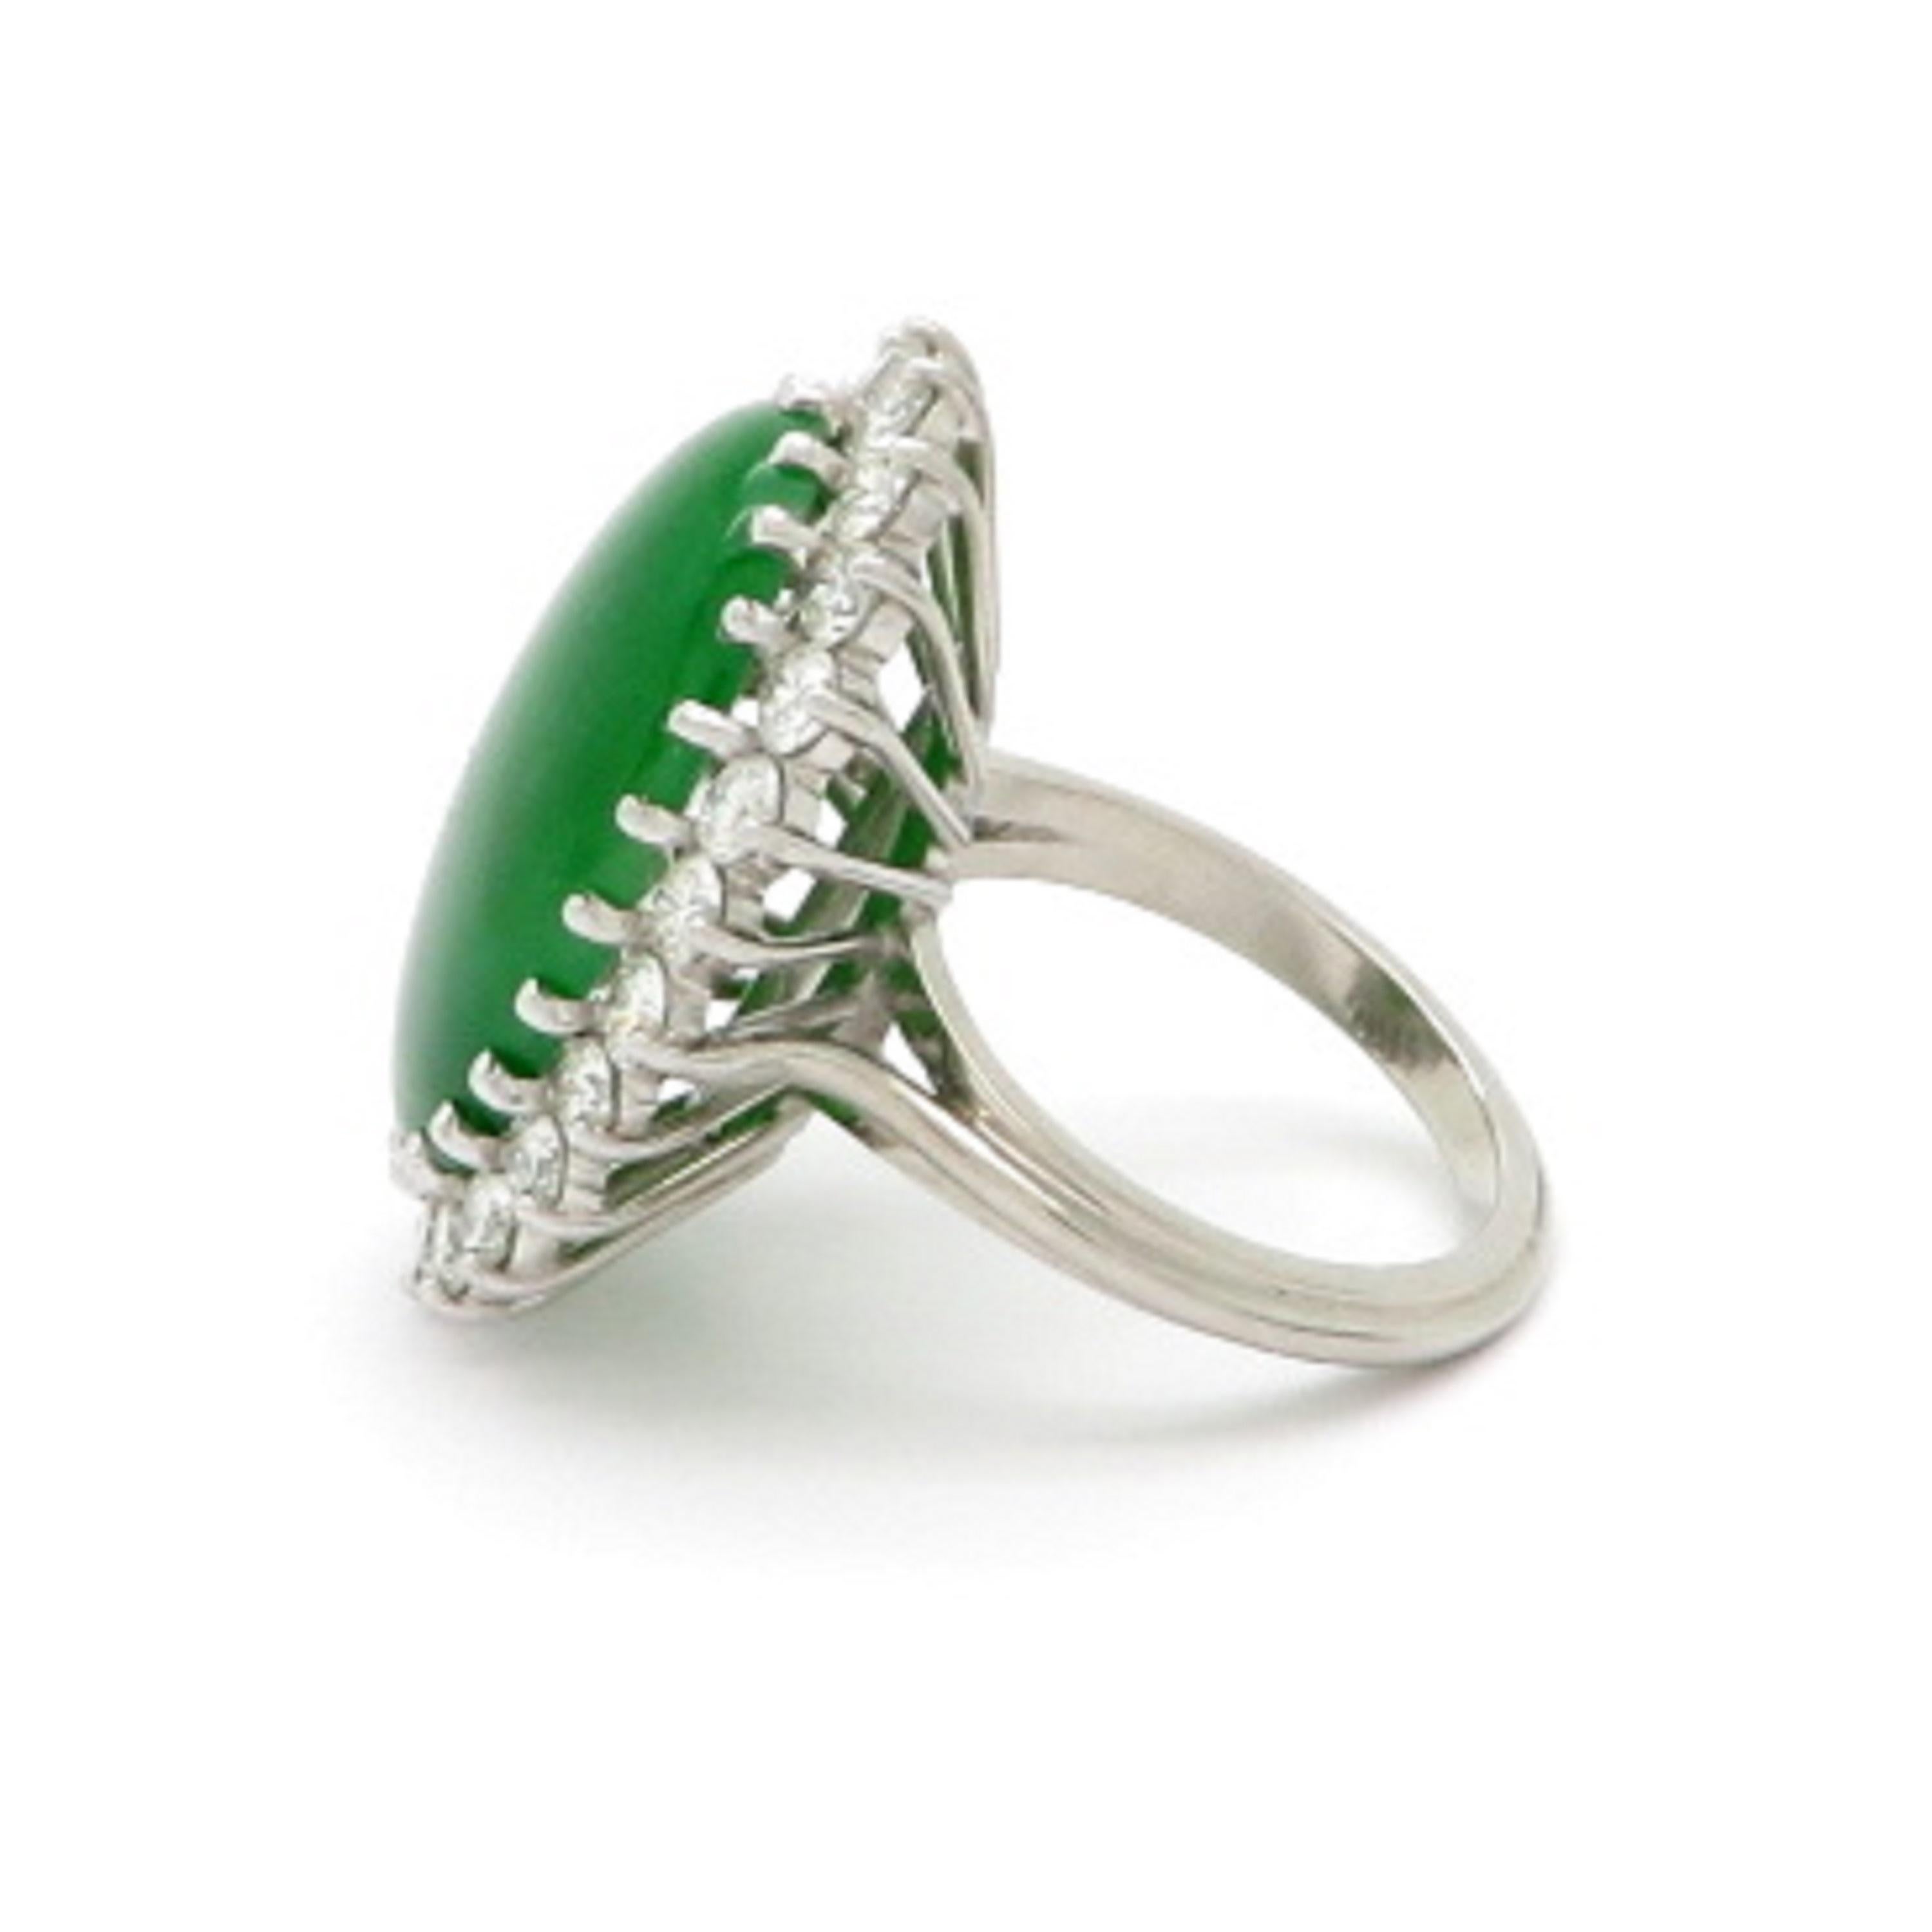 Oval Cut 11.72ct Jadeite Jade Ring - GIA Certified For Sale